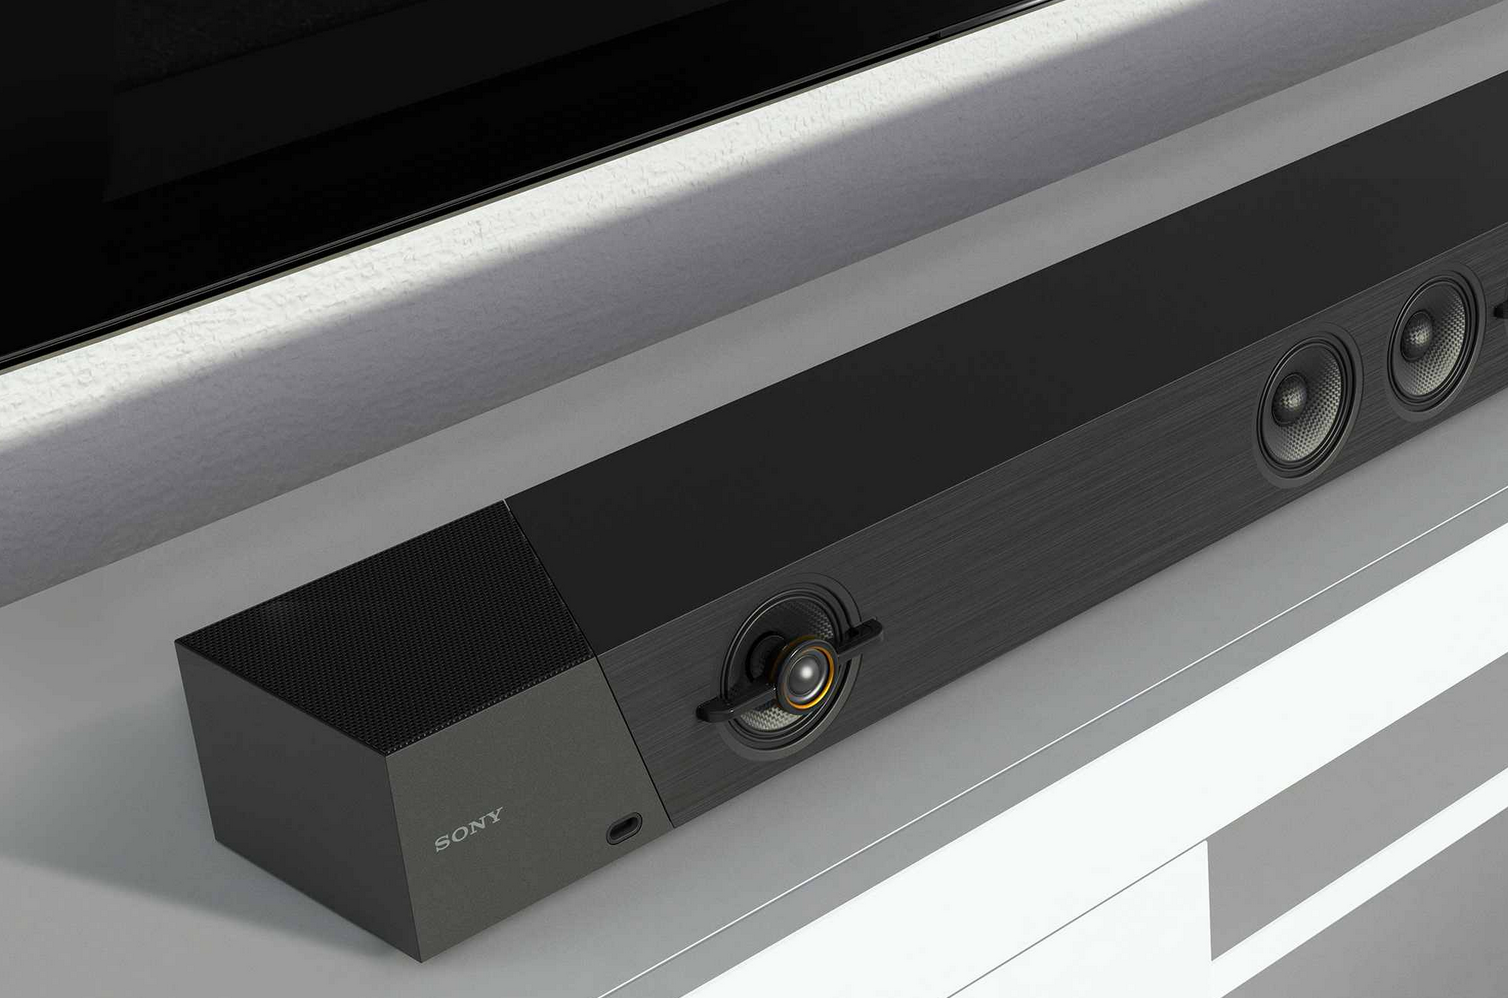 Sony HT-ST5000 sound bar and subwoofer review